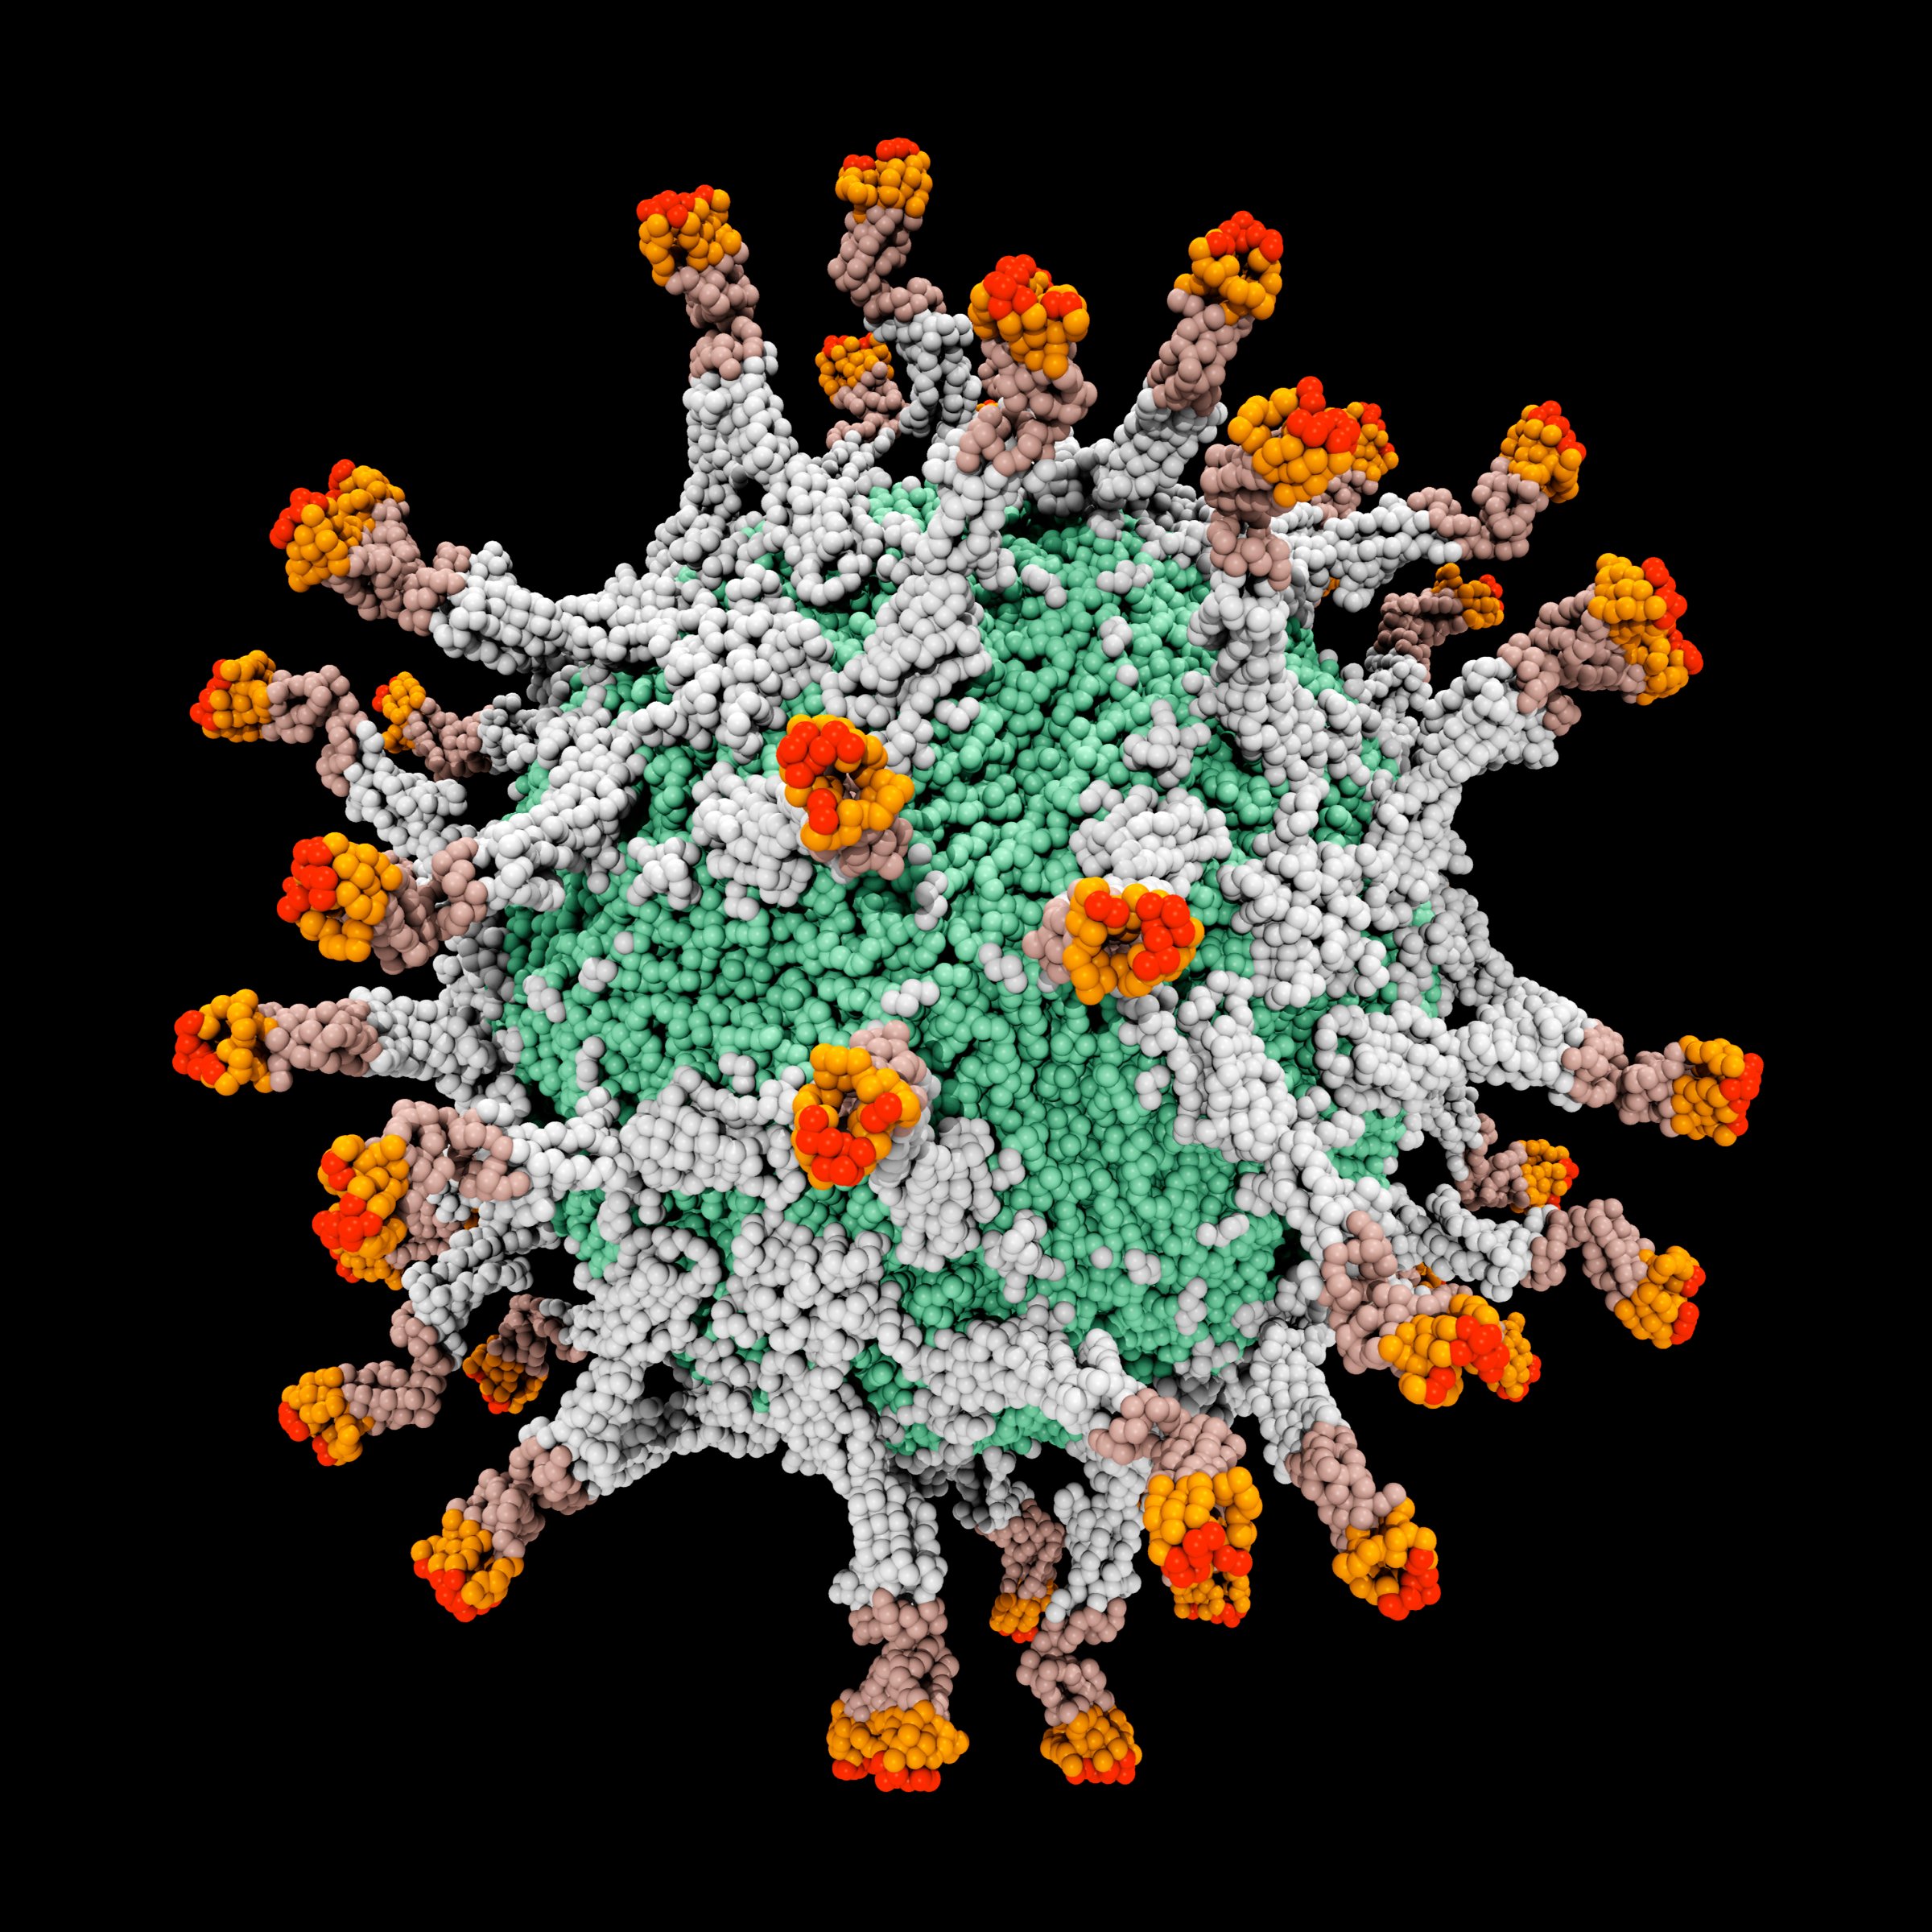 Goodbye to all that: Computer-generated model of a poliovirus